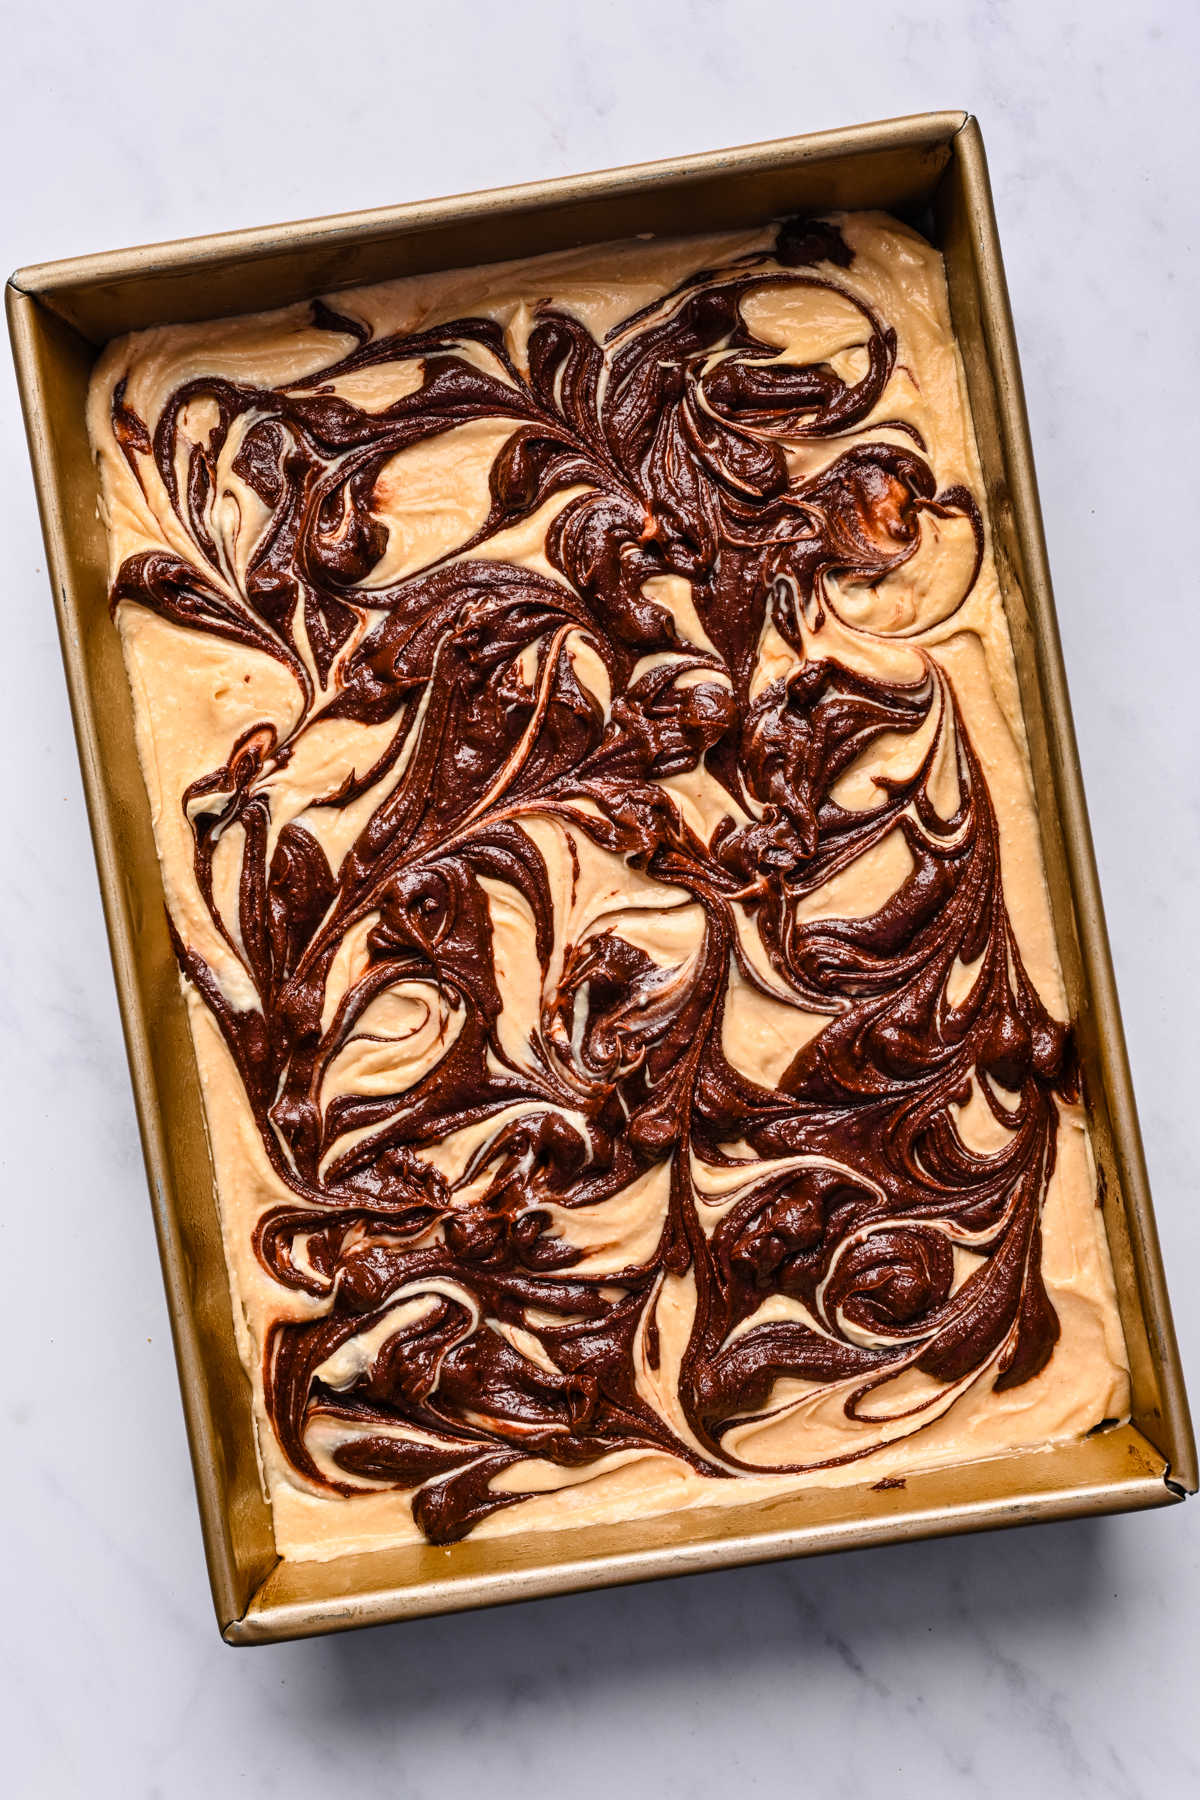 Swirled brownie and peanut butter batter in a metal baking pan.